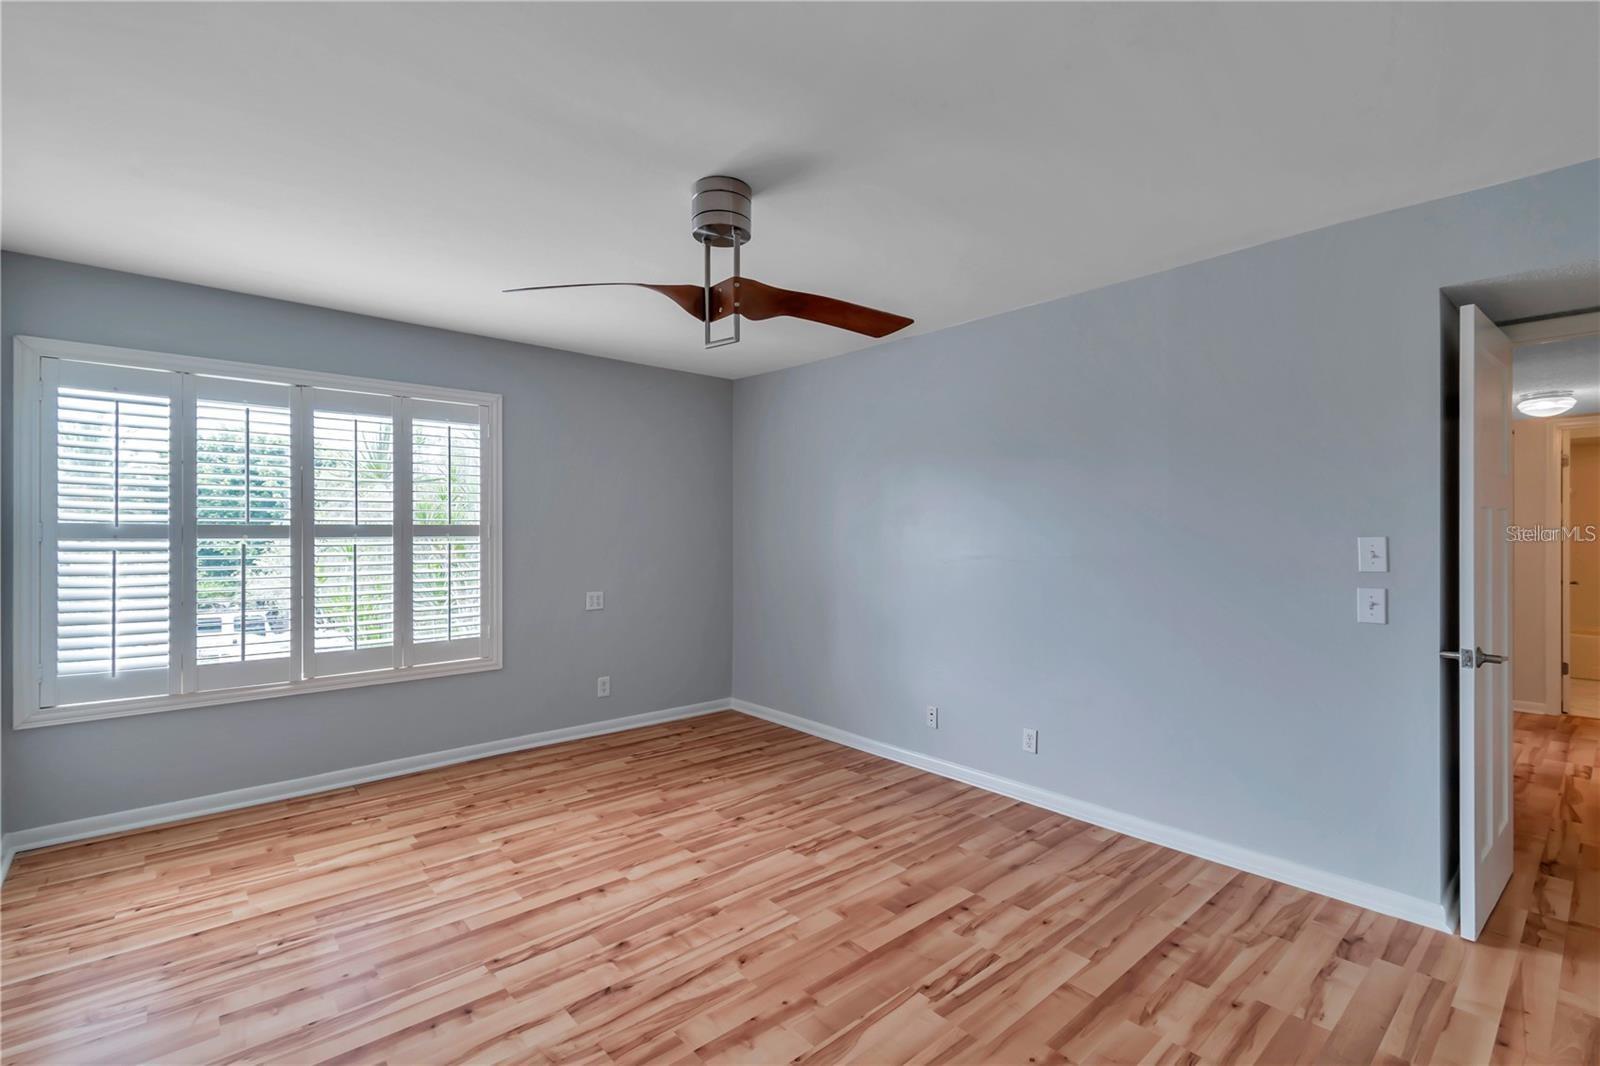 Nice window treatments, newer floors in primary and entire second floor!